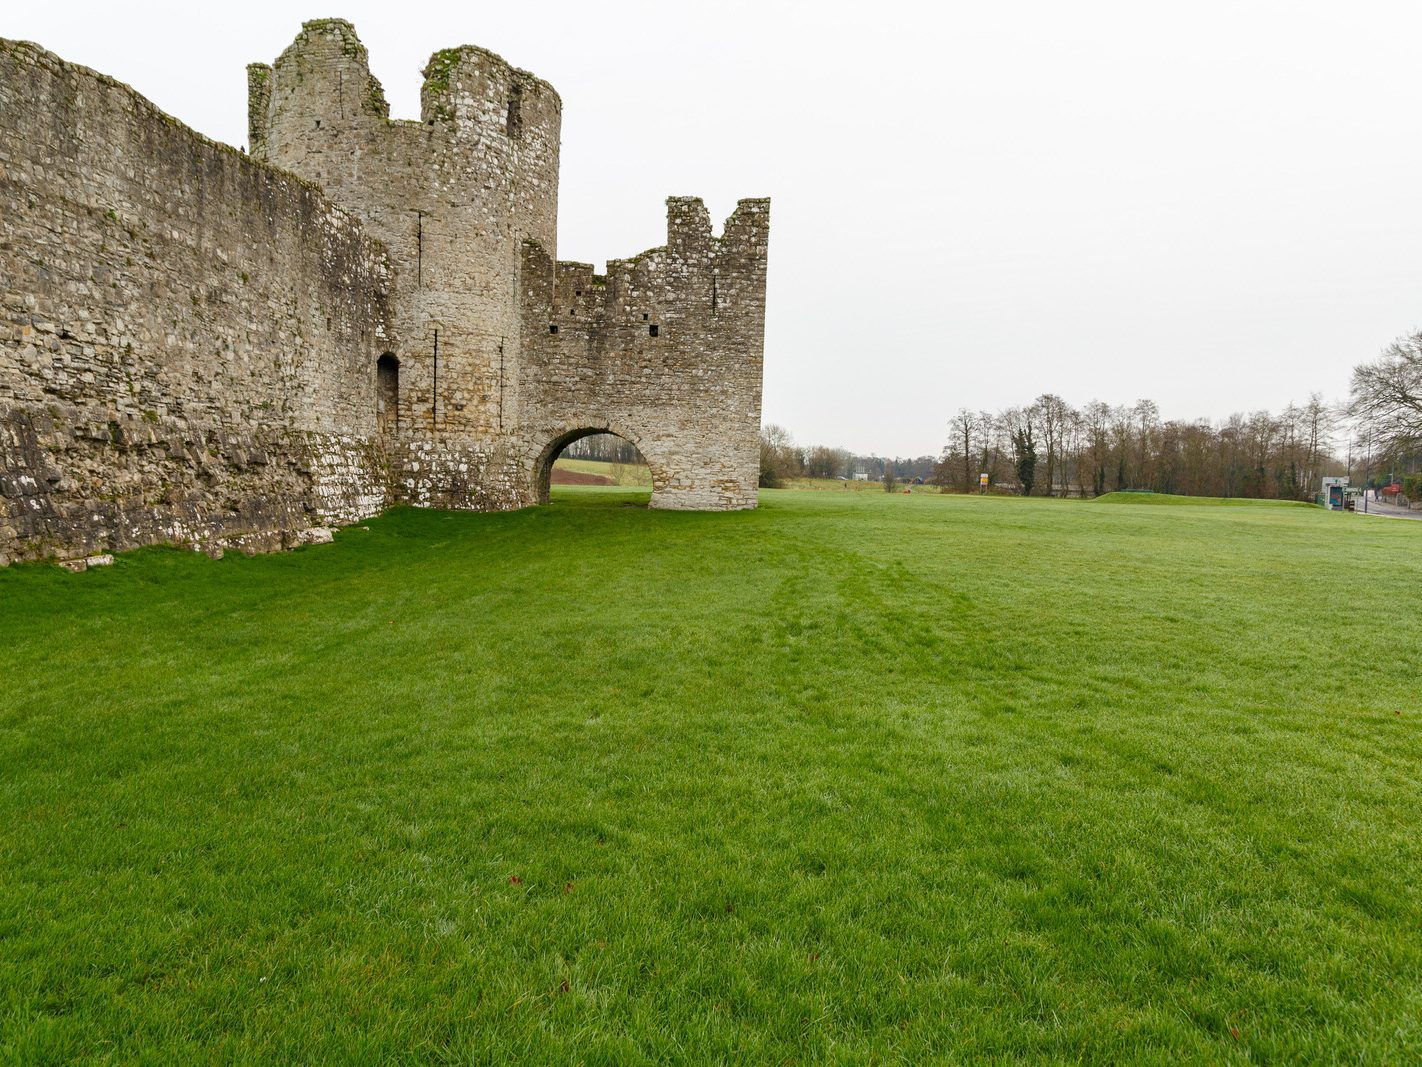 ON ST STEPHEN'S DAY I VISITED THE SOUTH BANK IN ORDER TO PHOTOGRAPH TRIM CASTLE [26 DECEMBER 2023]-226529-1